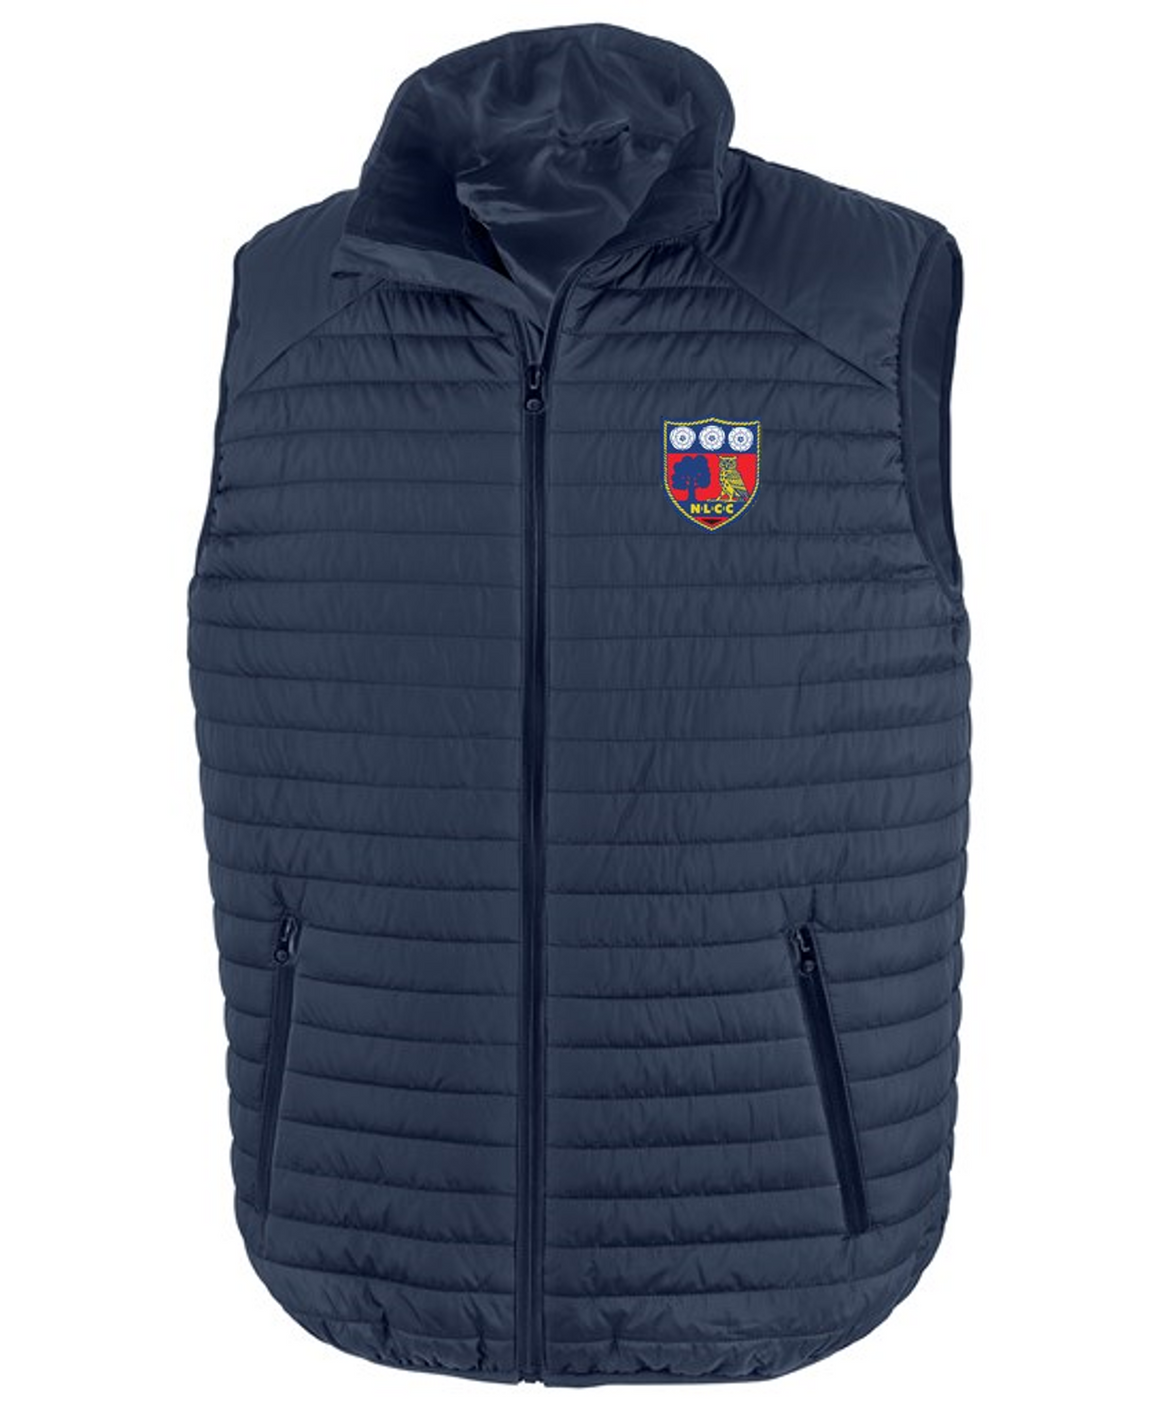 North Leeds Cricket Club Gilet (Adult Sizes Only)